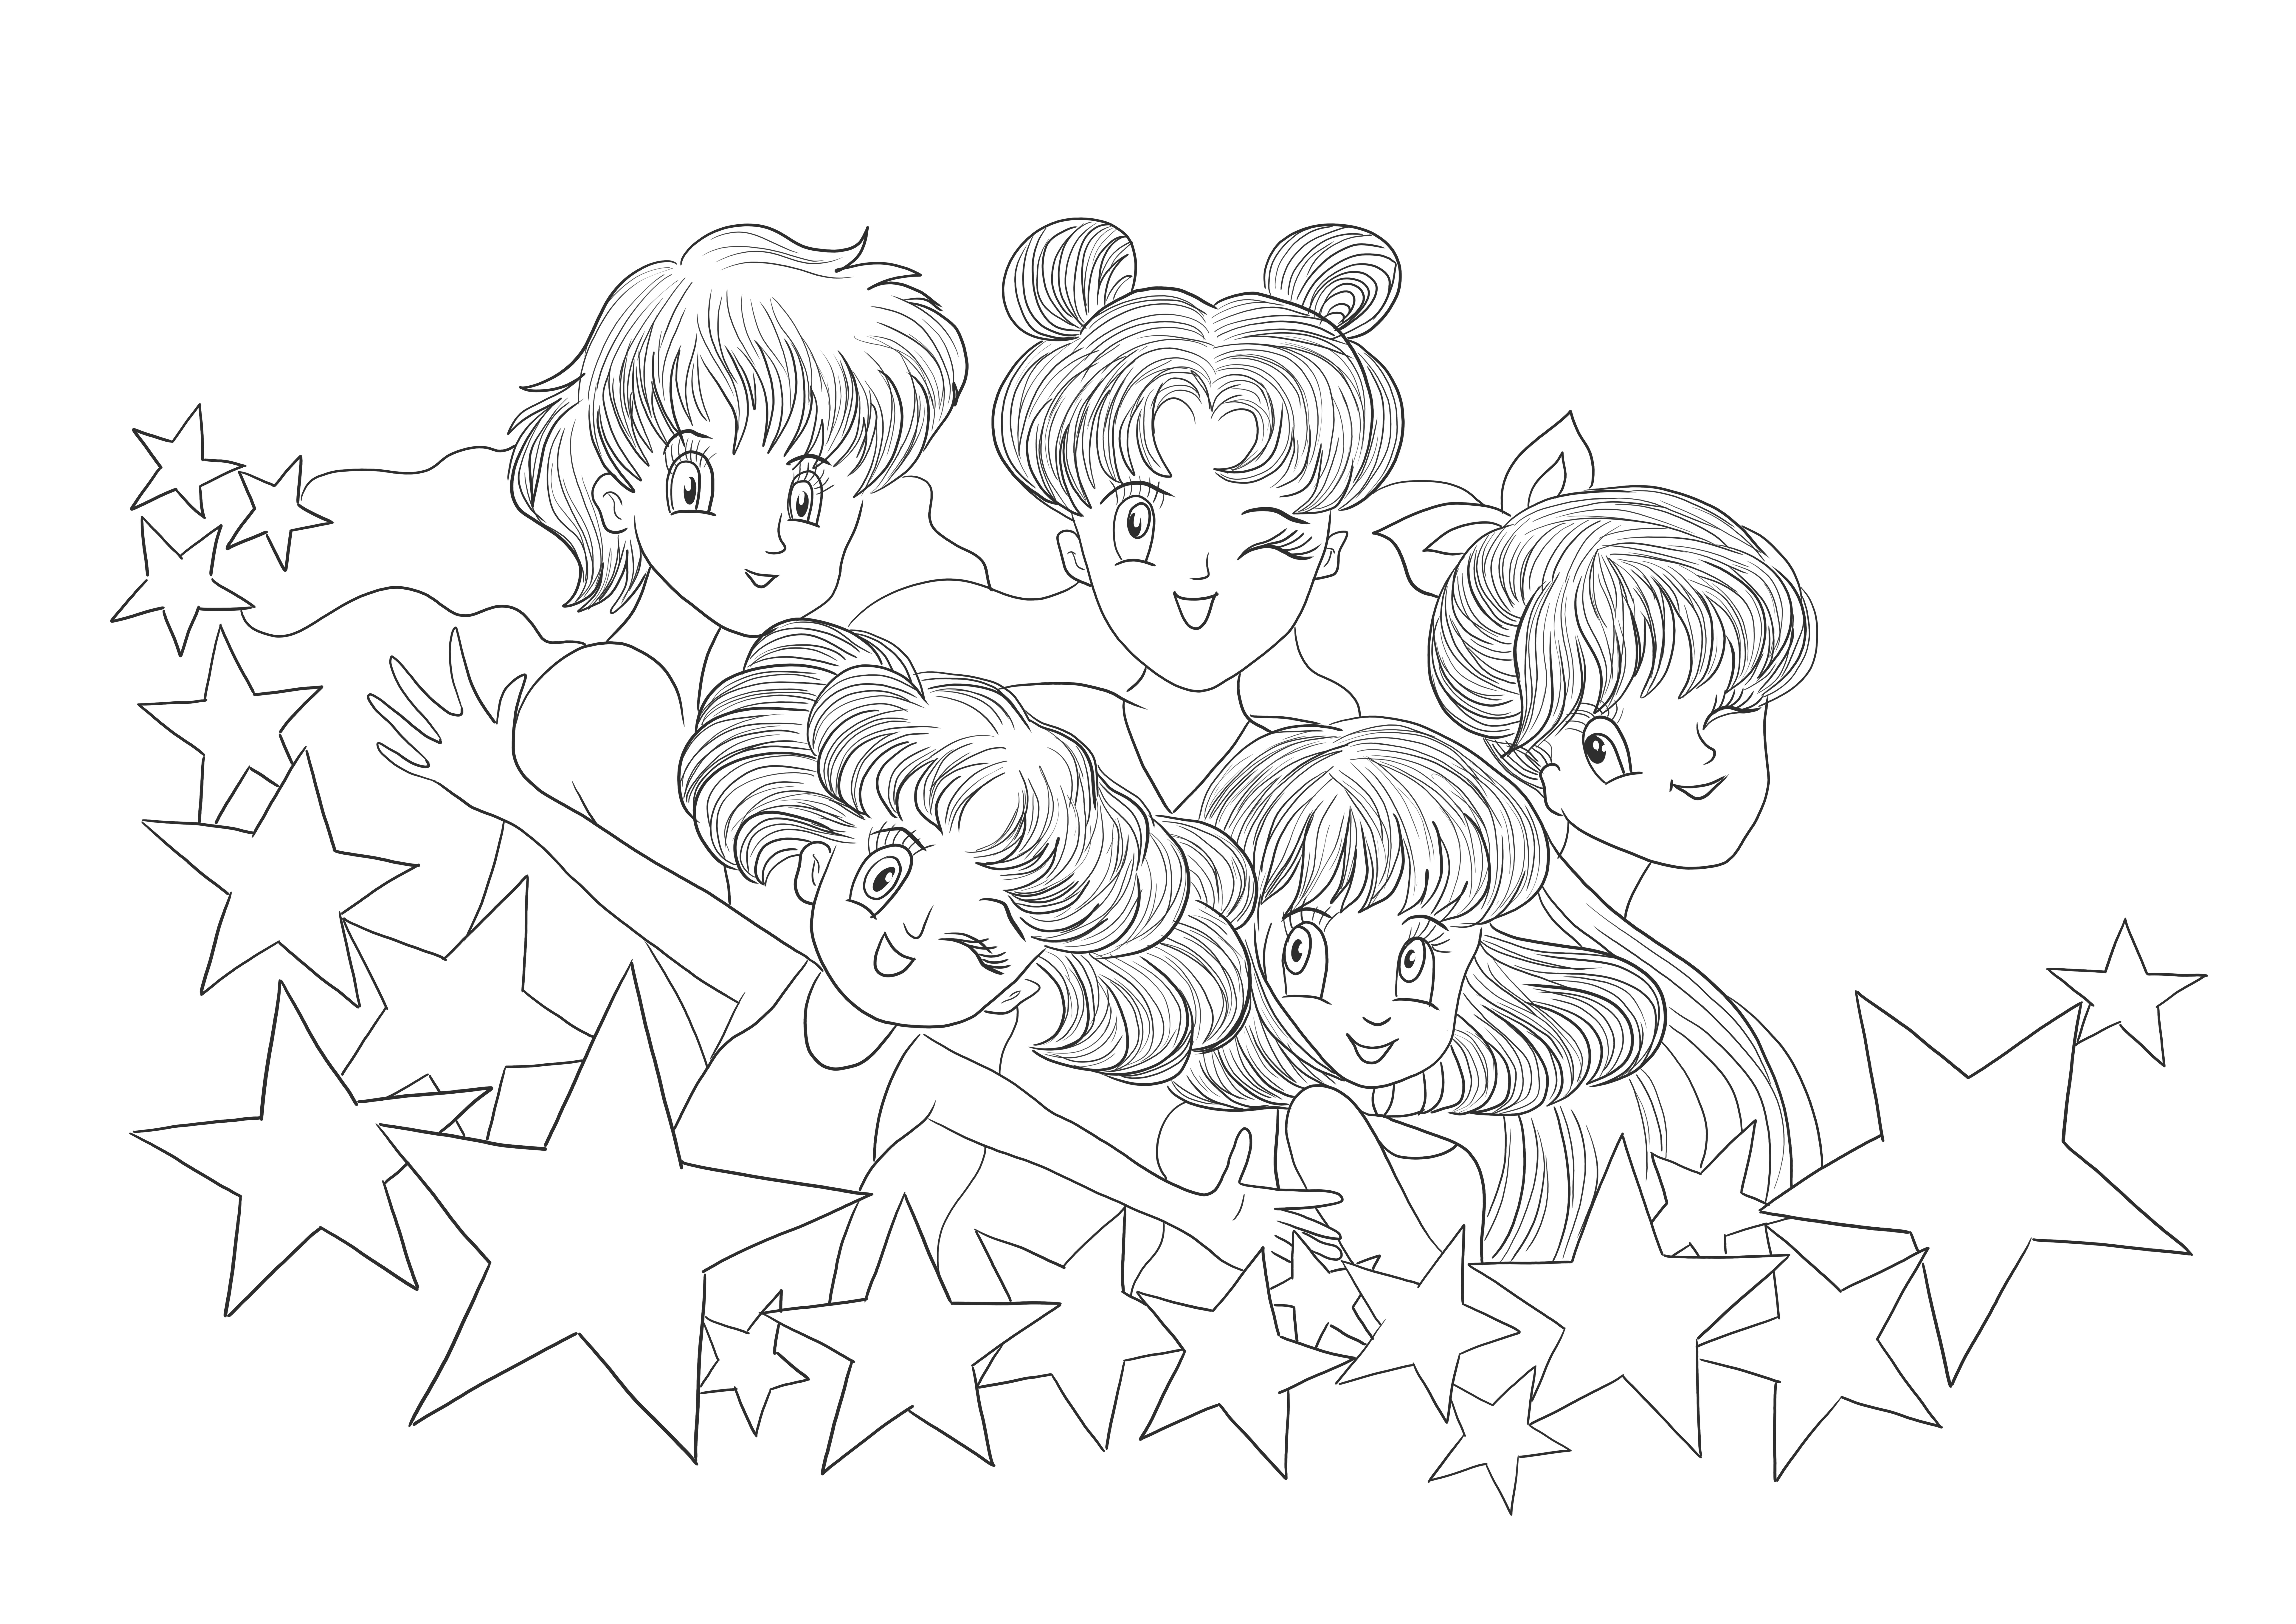 Free printable Sailor Moon images to download and print for kids to color.